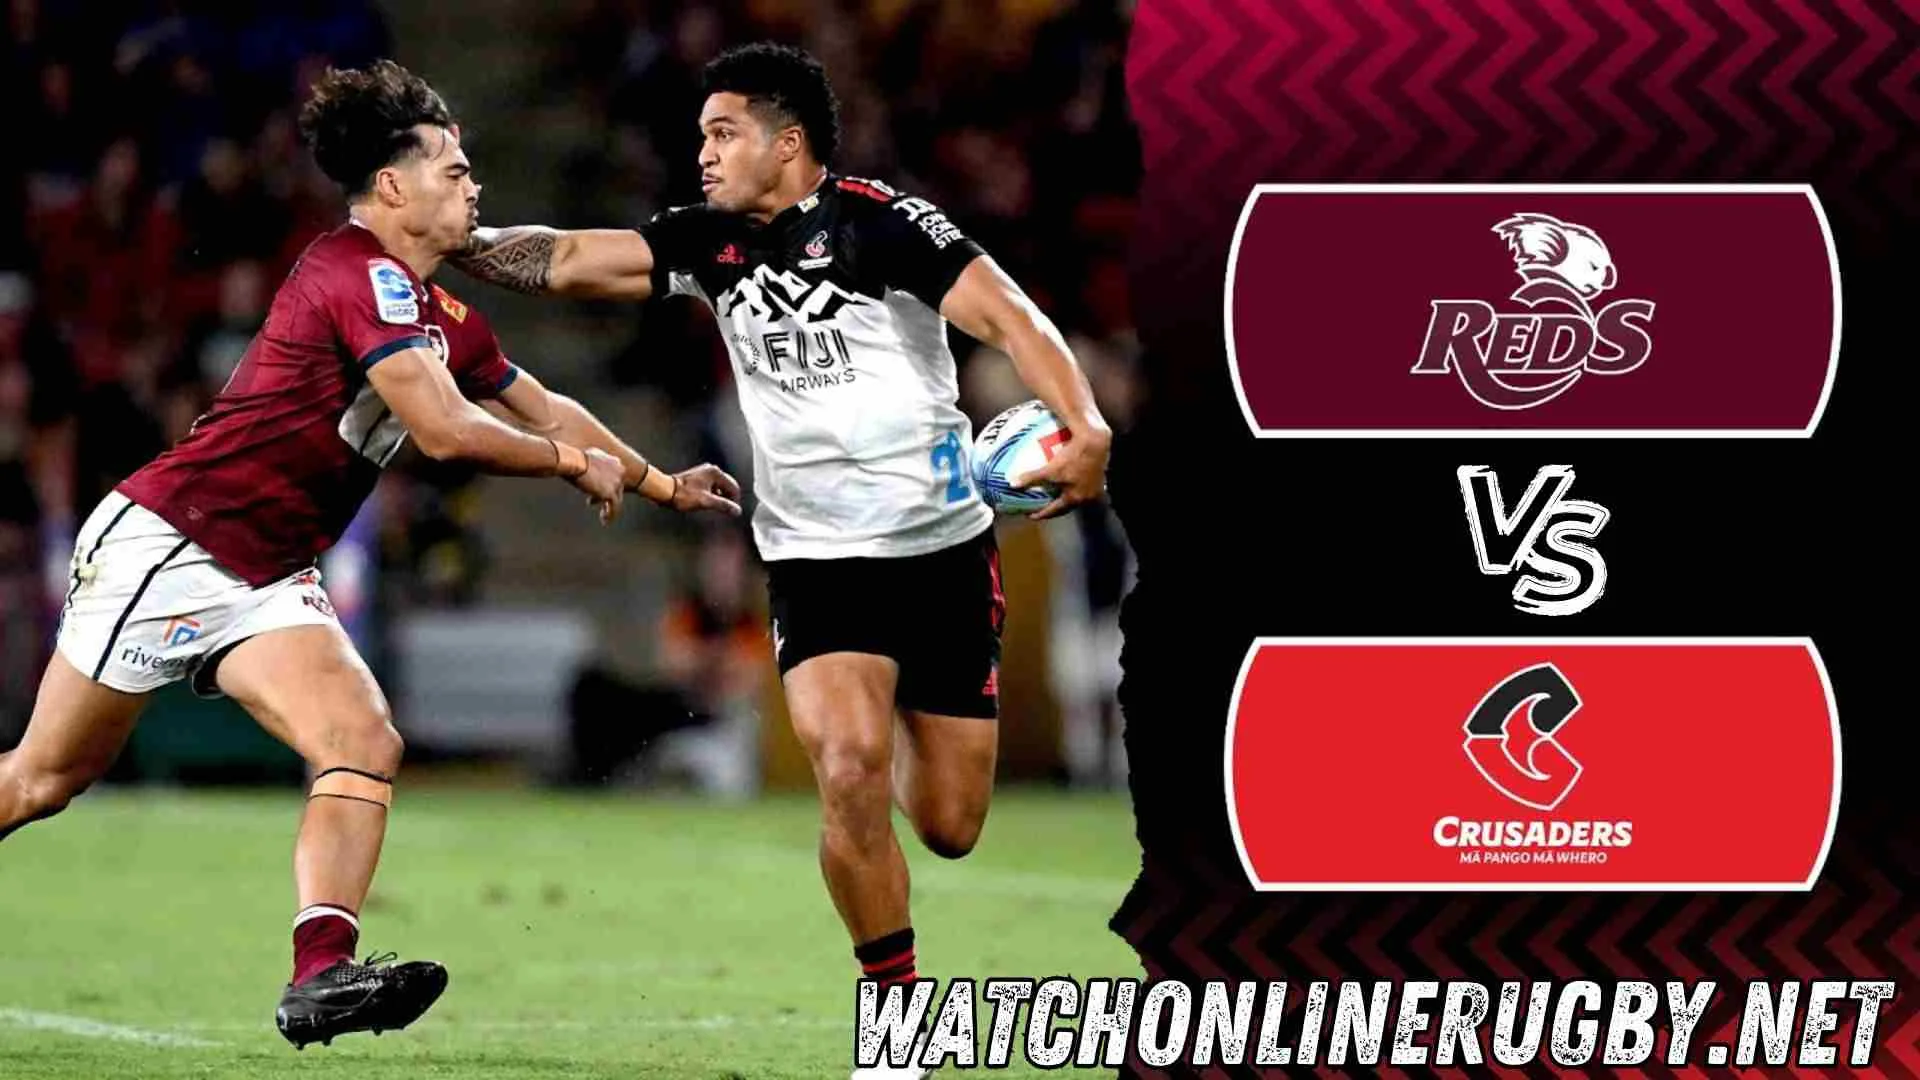 Reds Vs Crusaders Live Coverage